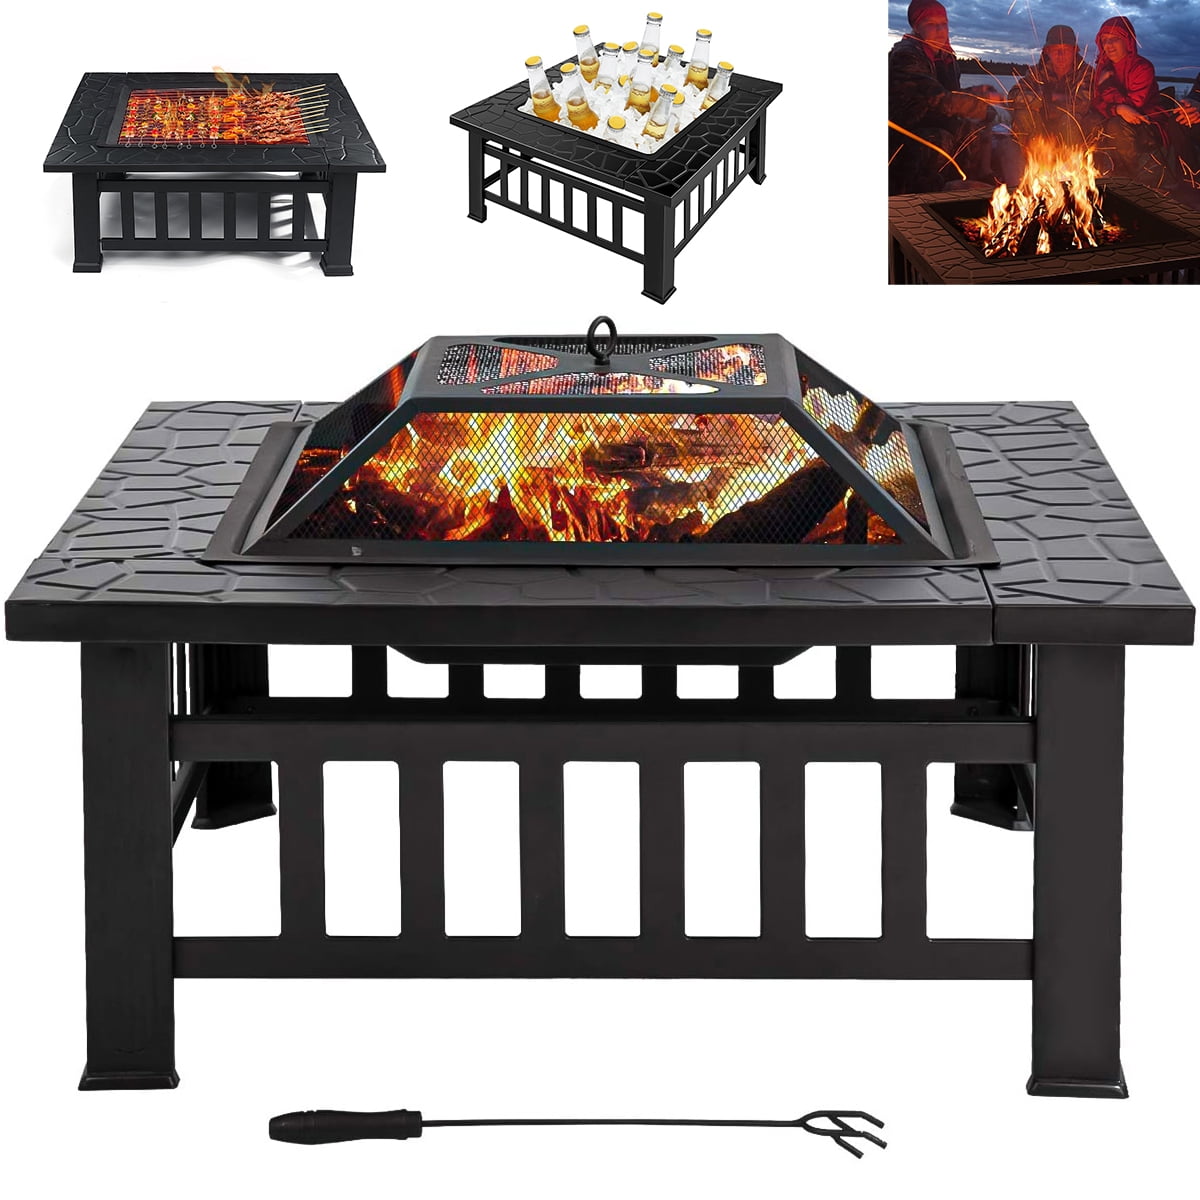 Details about   3 in 1 Outdoor Metal Firepit 32" Patio Garden Square Stove Fire Pit With Cover 